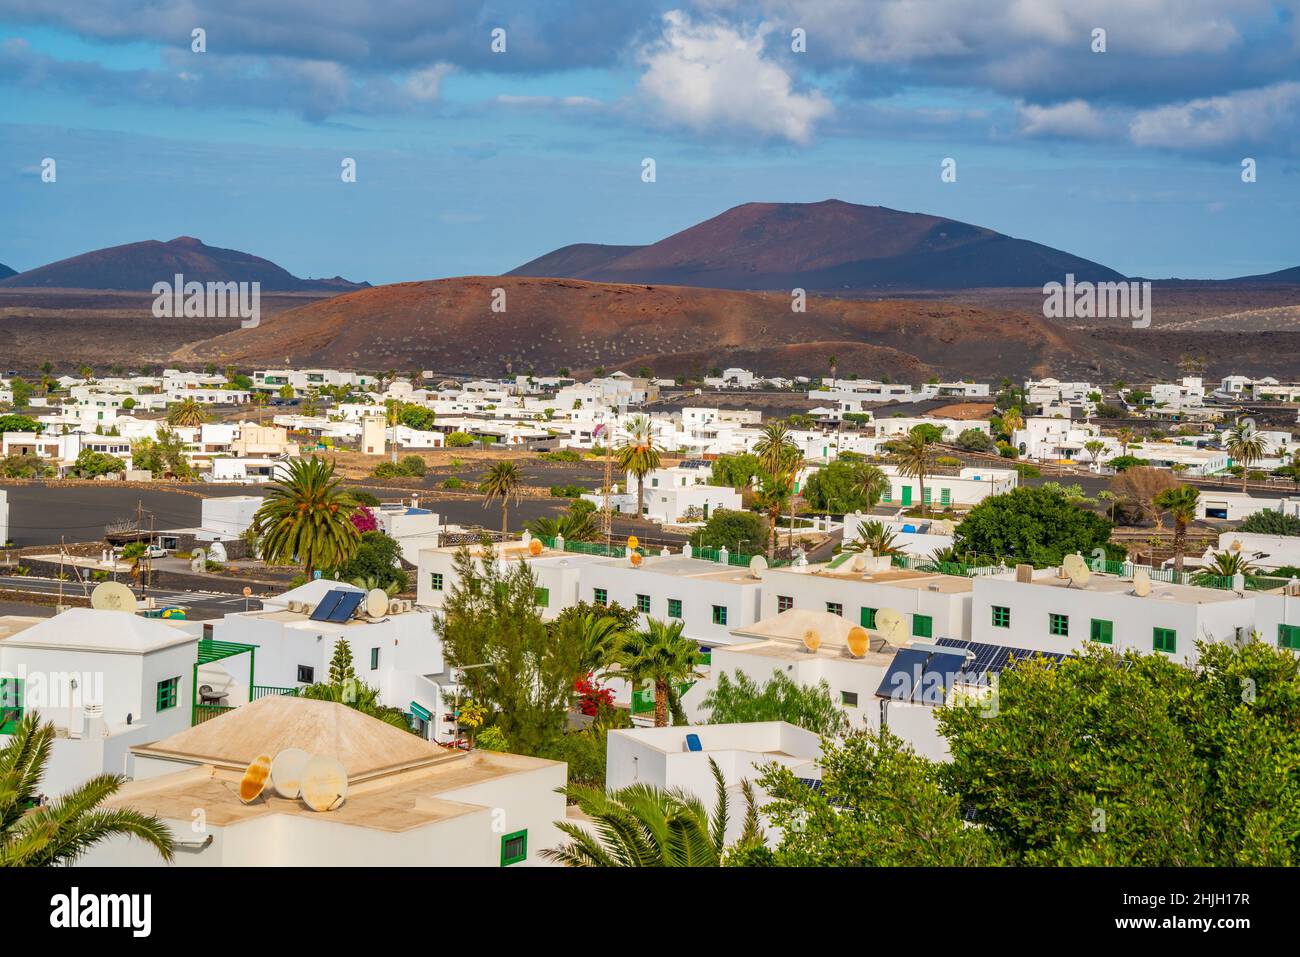 View of town from elevated position with mountainous backdrop, Yaisa, Lanzarote, Canary Islands, Spain, Europe Stock Photo